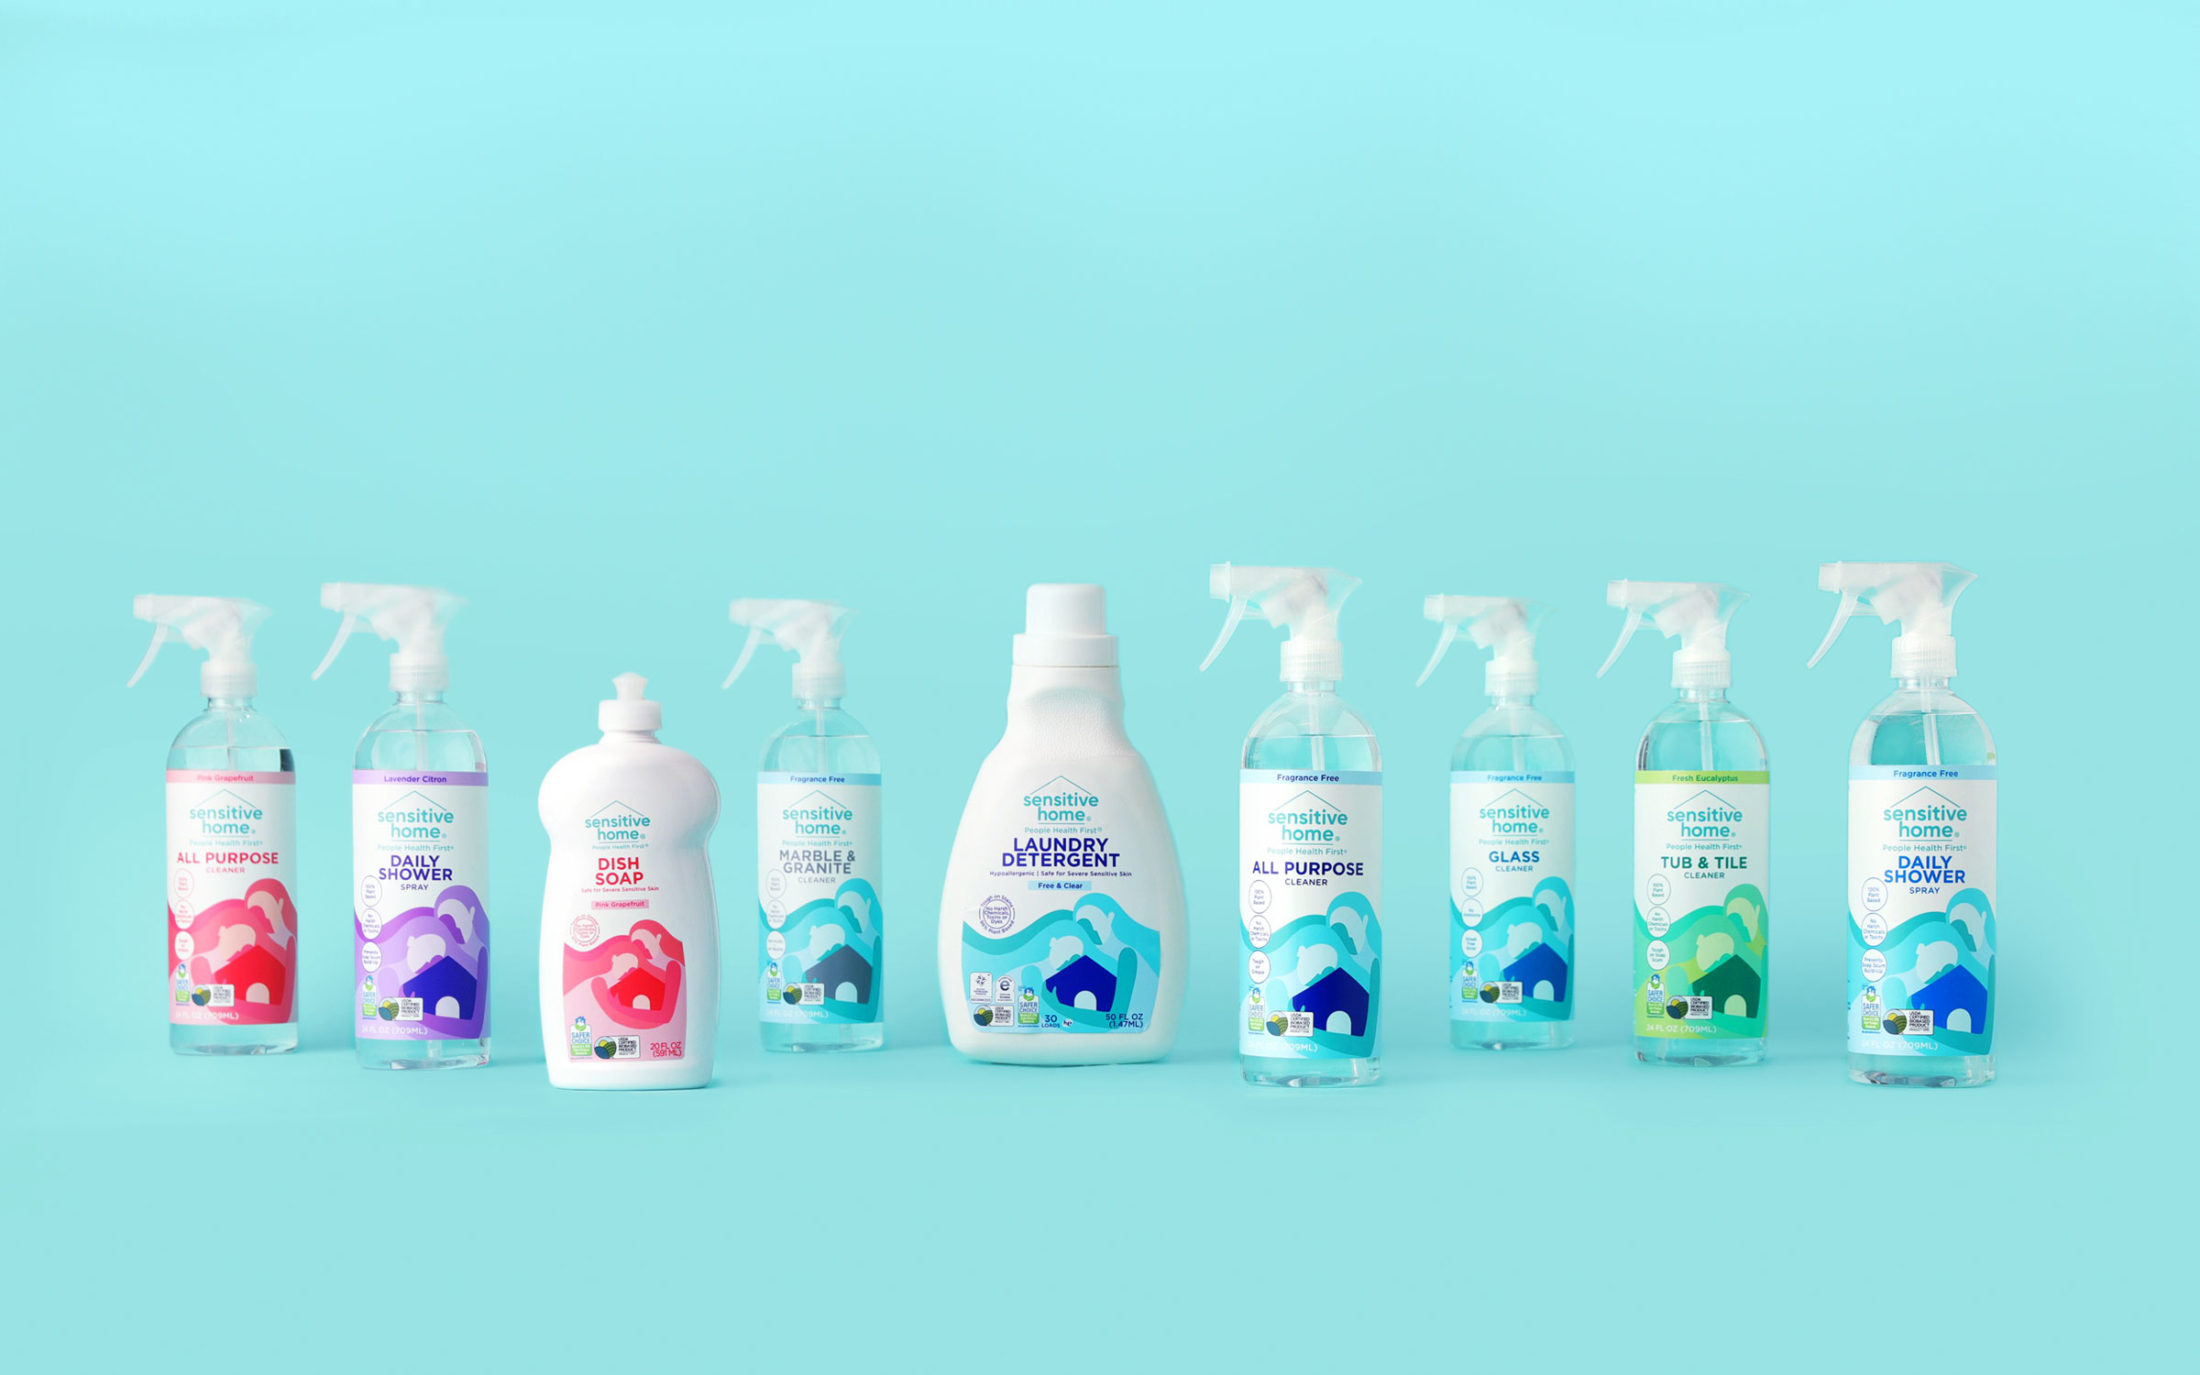 A lineup of Sensitive Home products featuring spray bottle cleaners, dish soap, and laundry detergent photographed on a light blue background.